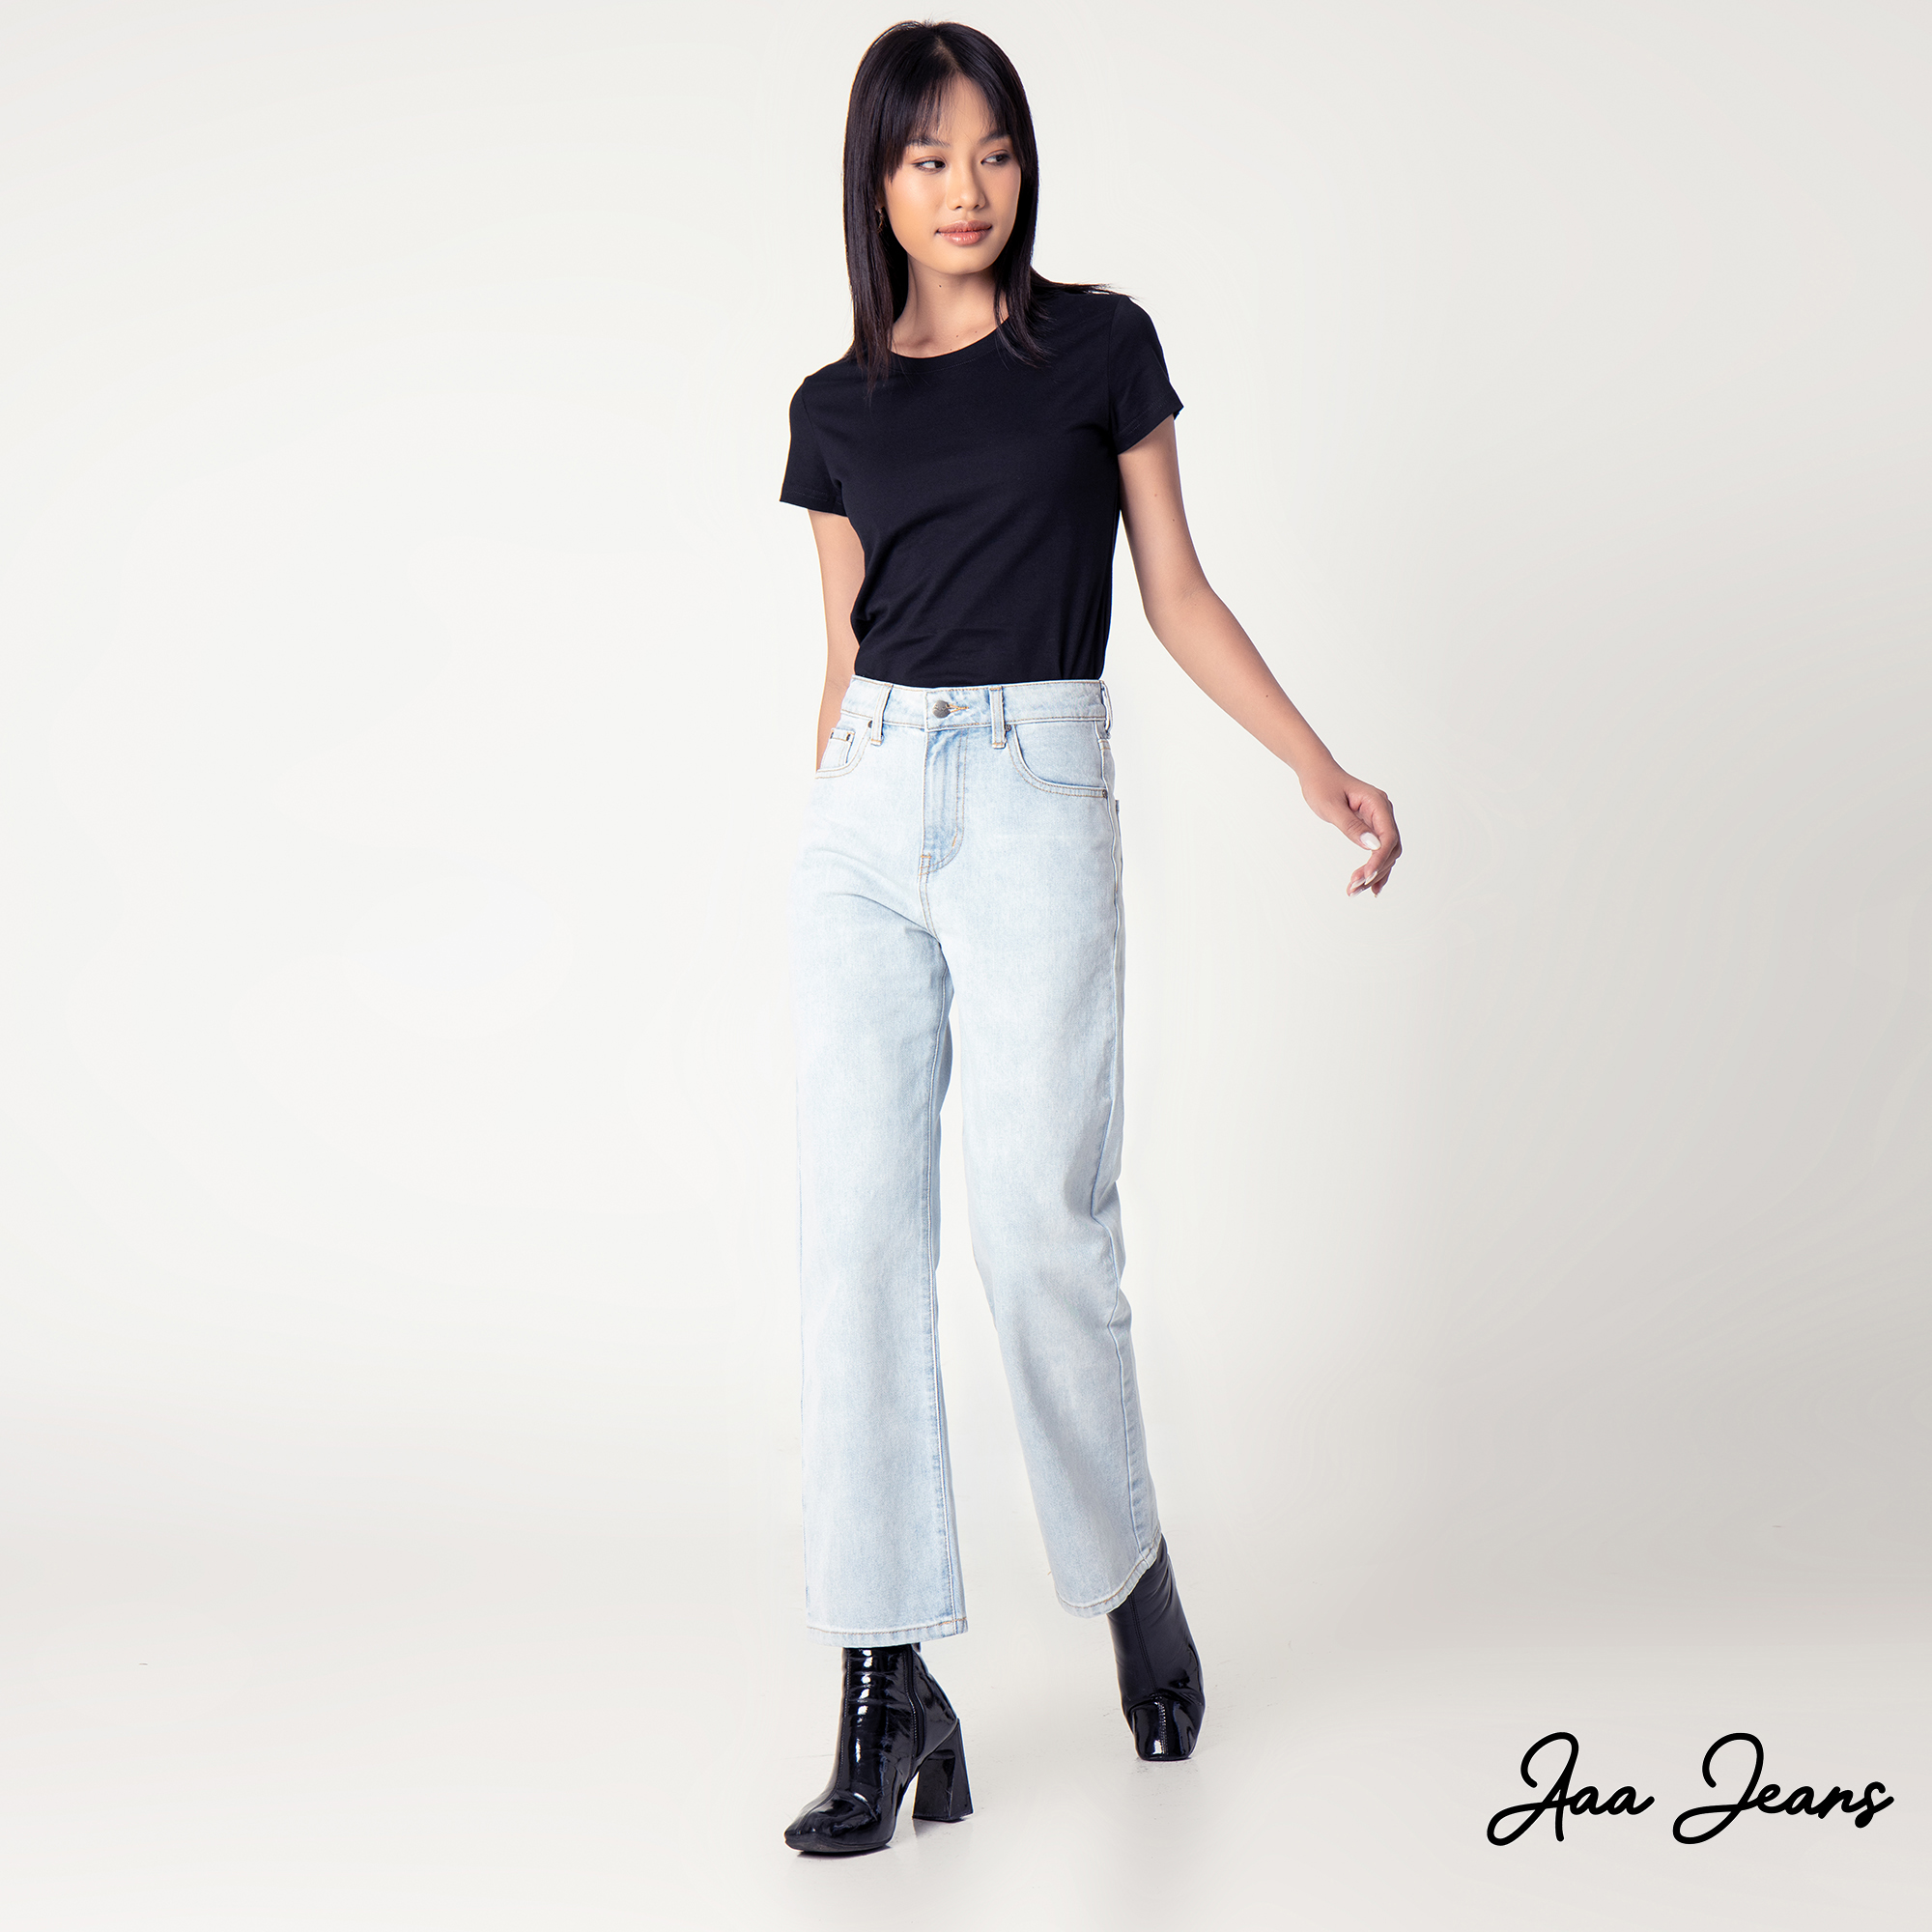 Quần Jean Ống Rộng Nữ Lưng Cao Alice Blue Aaa Jeans